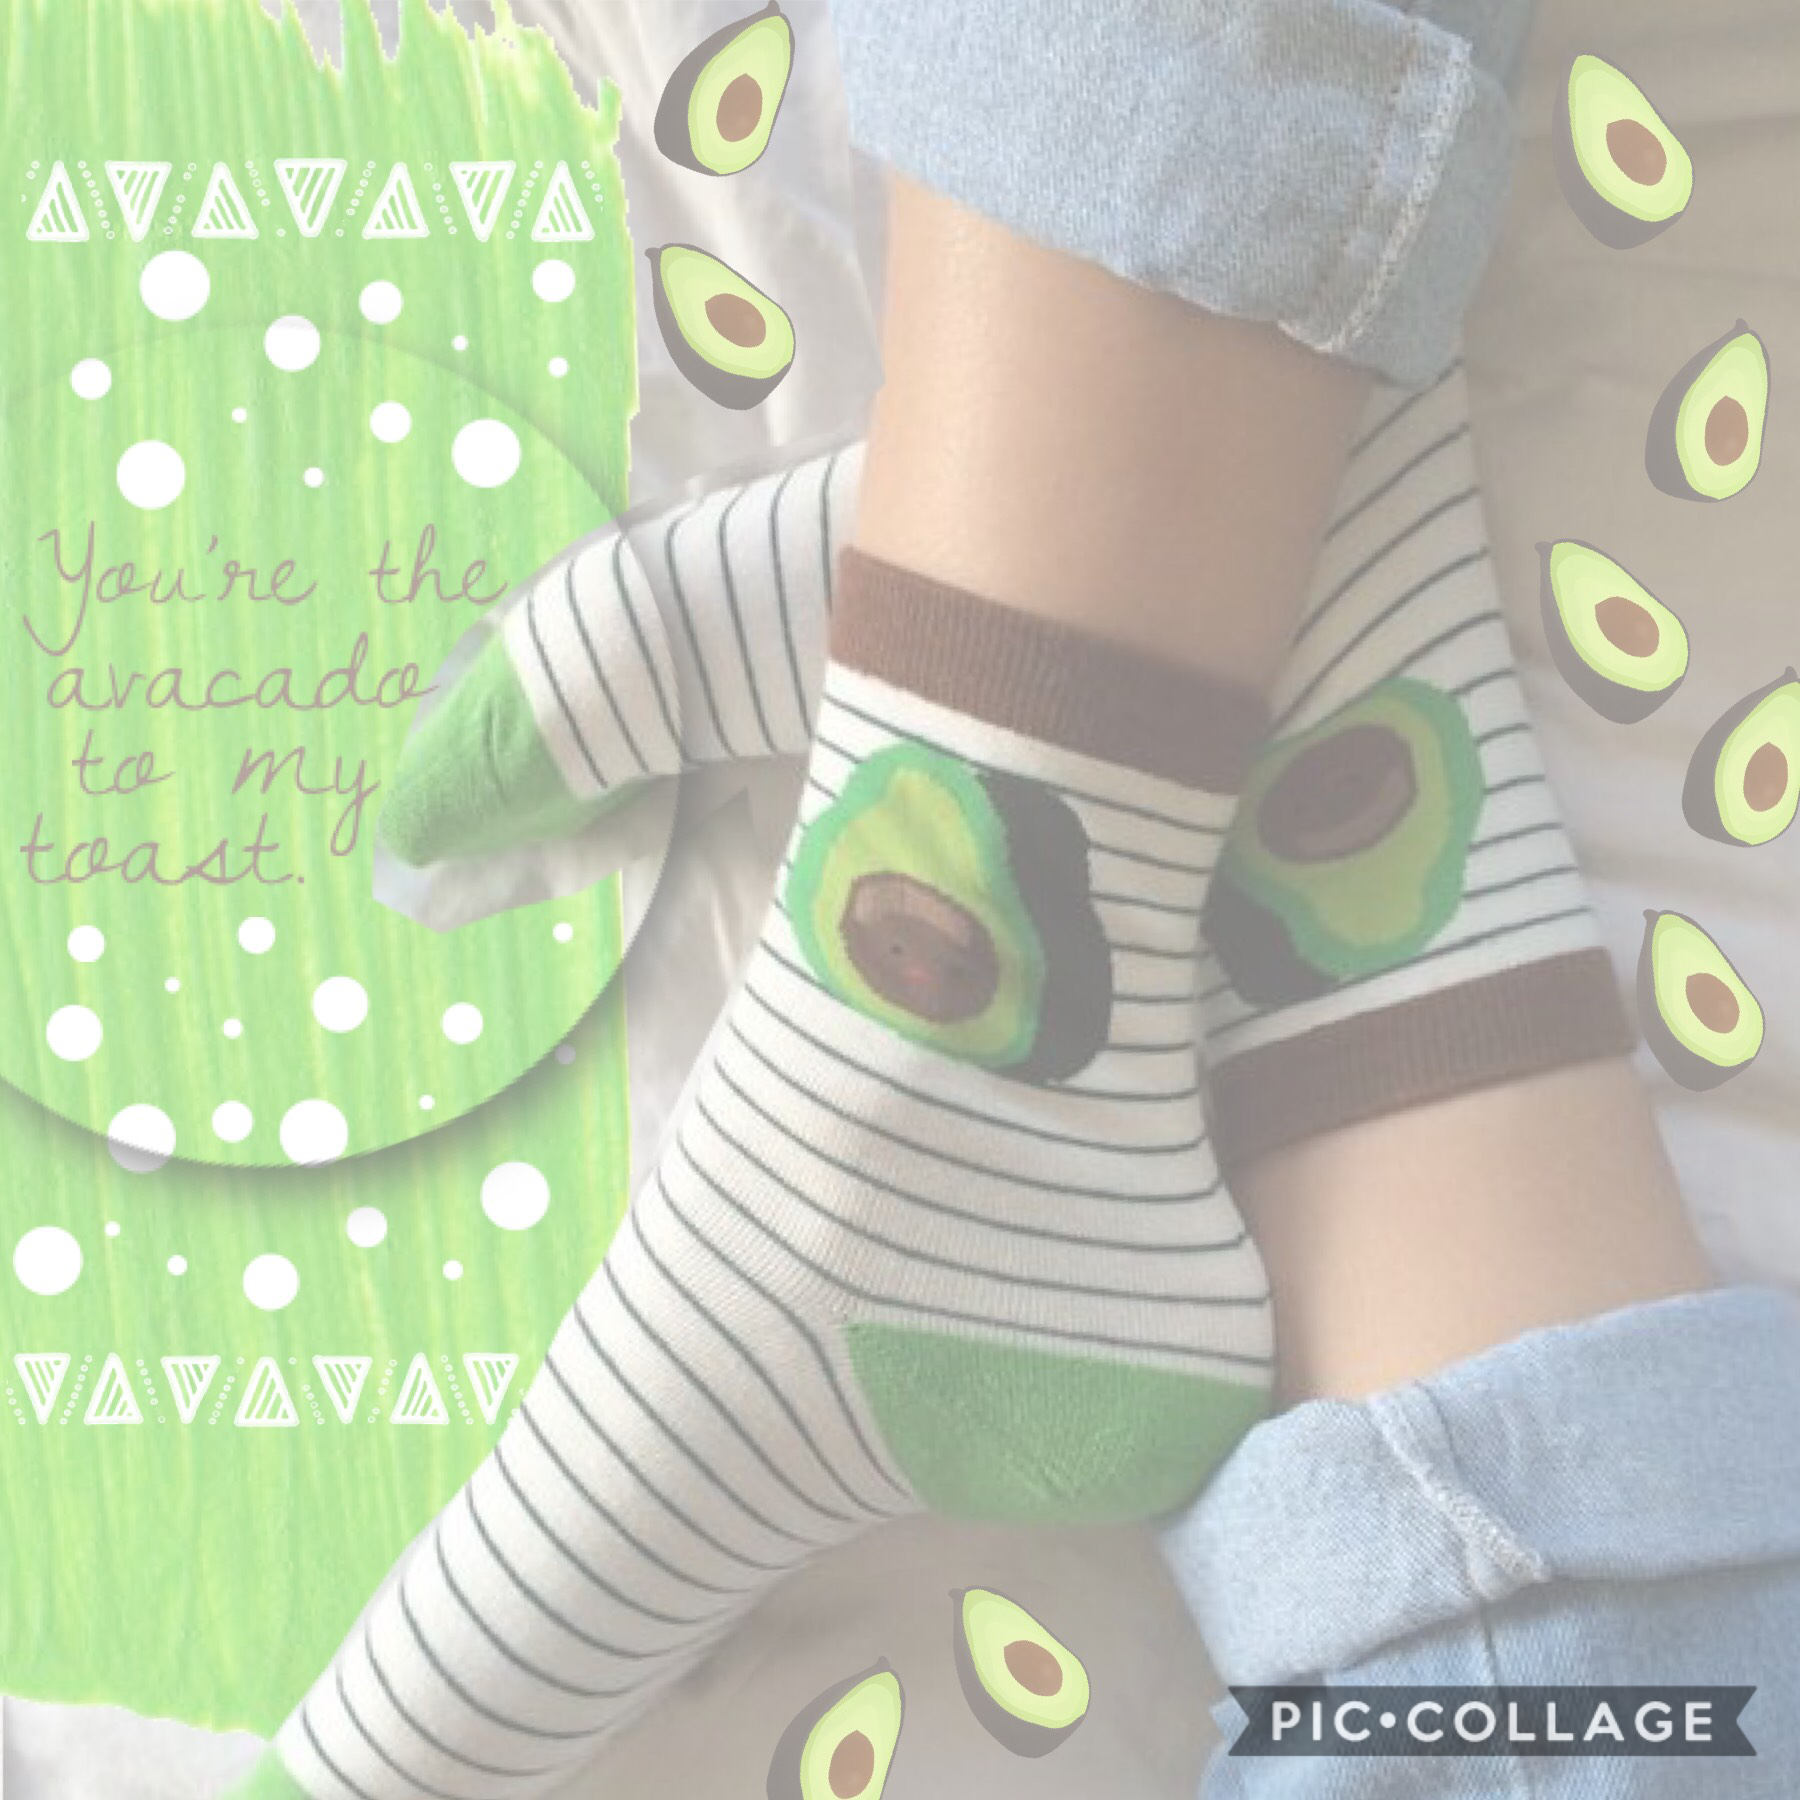 tap!!🥑🥑
Fifth collage for this theme! LIME GREEN!!! Next up... blue! Rate this 1-10? I don’t know really what to think of this, it’s ok I guess. Should I do light or royal blue for my next collage? Thanks! QOTD: 🥑 or 🌵 emoji? AOTD: 🥑!!!